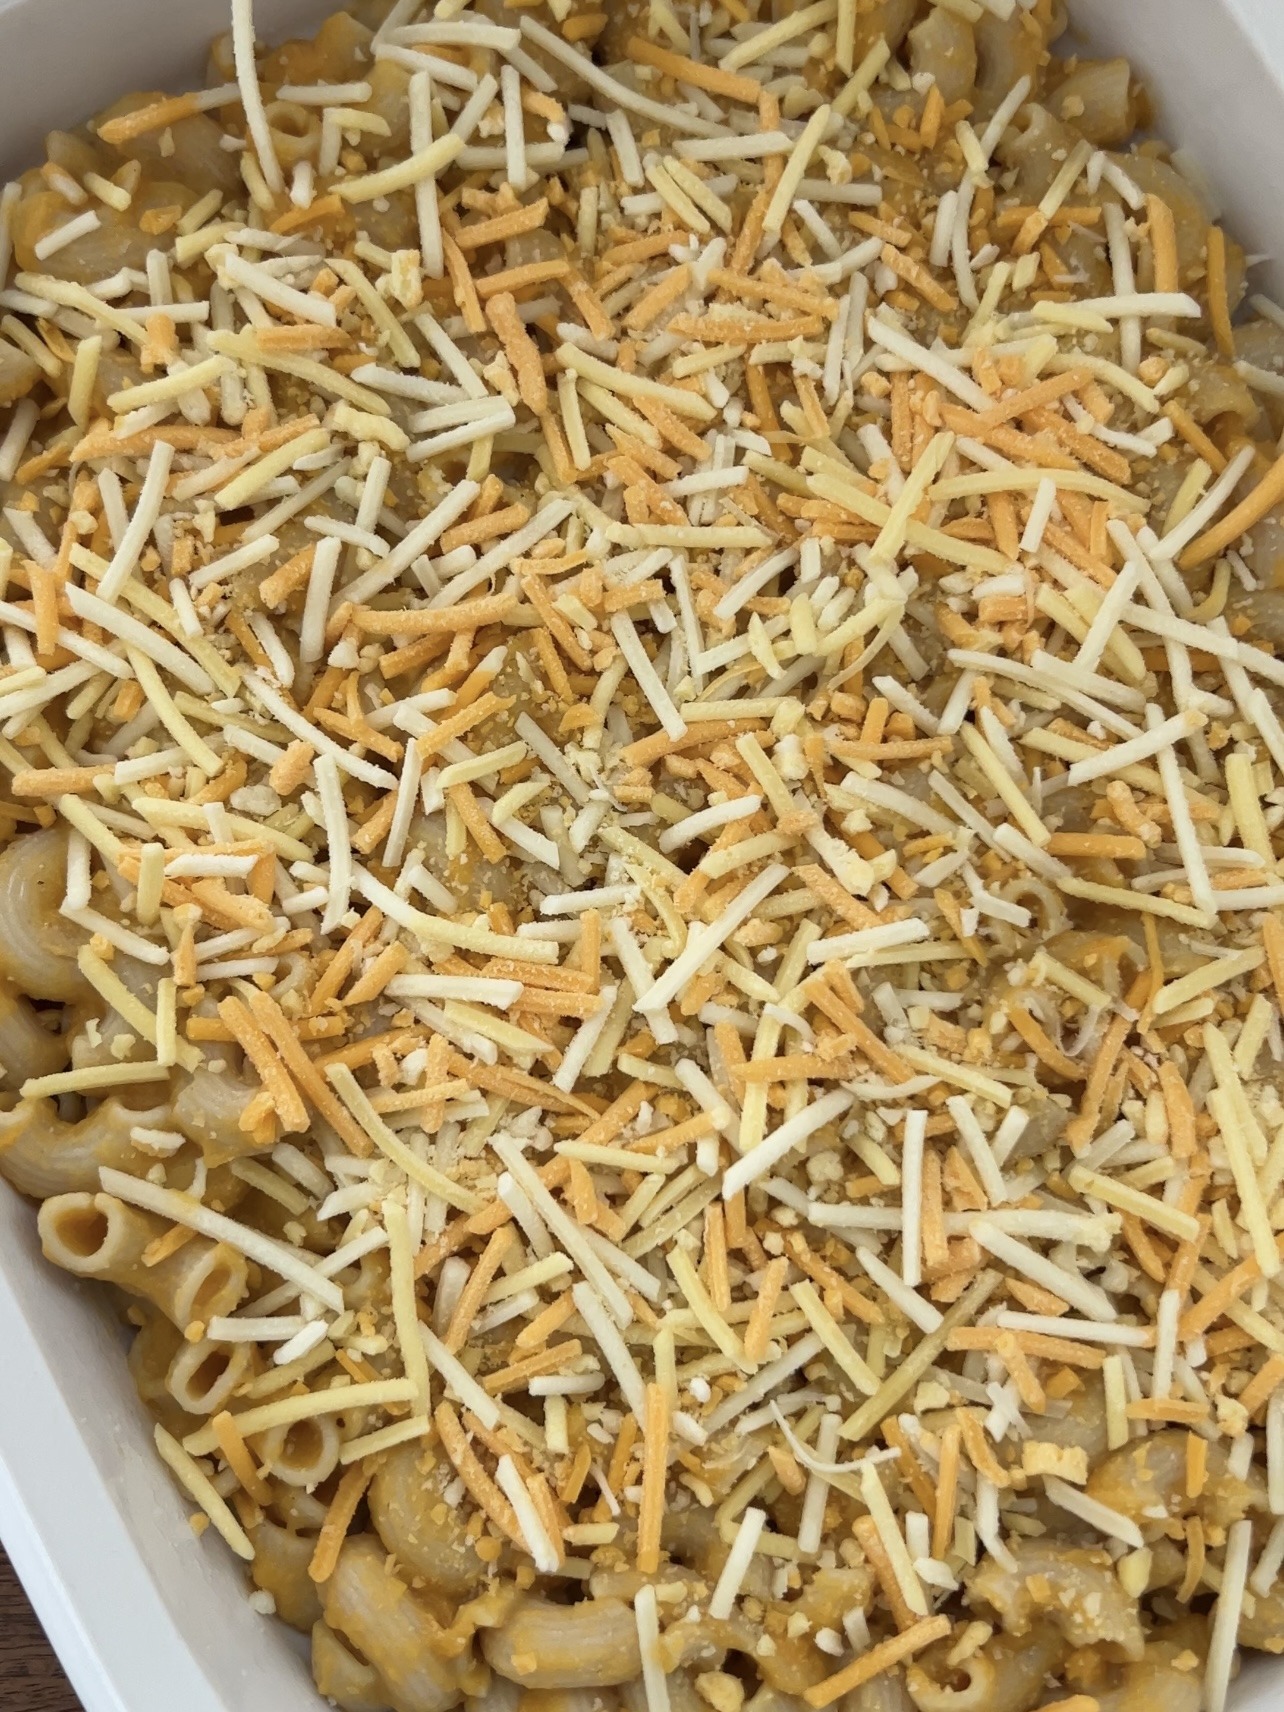 Step 6: Mix the sauce with the noodles and then transfer them all into a greased baking dish. Top with shredded vegan cheese and spray with olive oil.